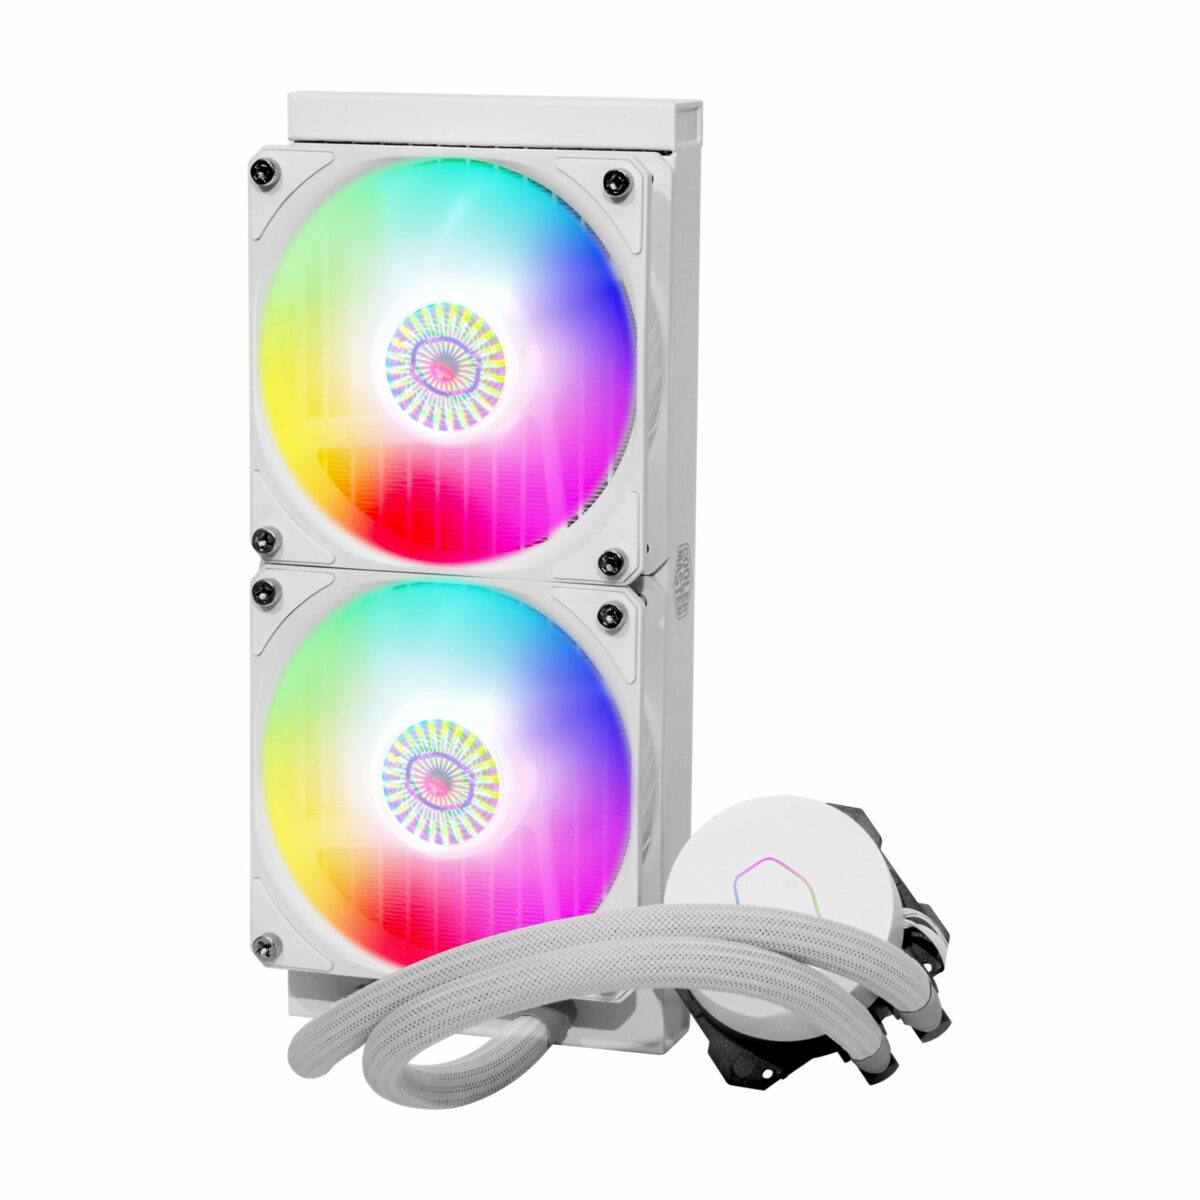 Cooler Master MasterLiquid ML240L V2 ARGB White Edition Siple Water Cooling CPU Cooler \ MLW-D24M-A18PW-RW FN1571